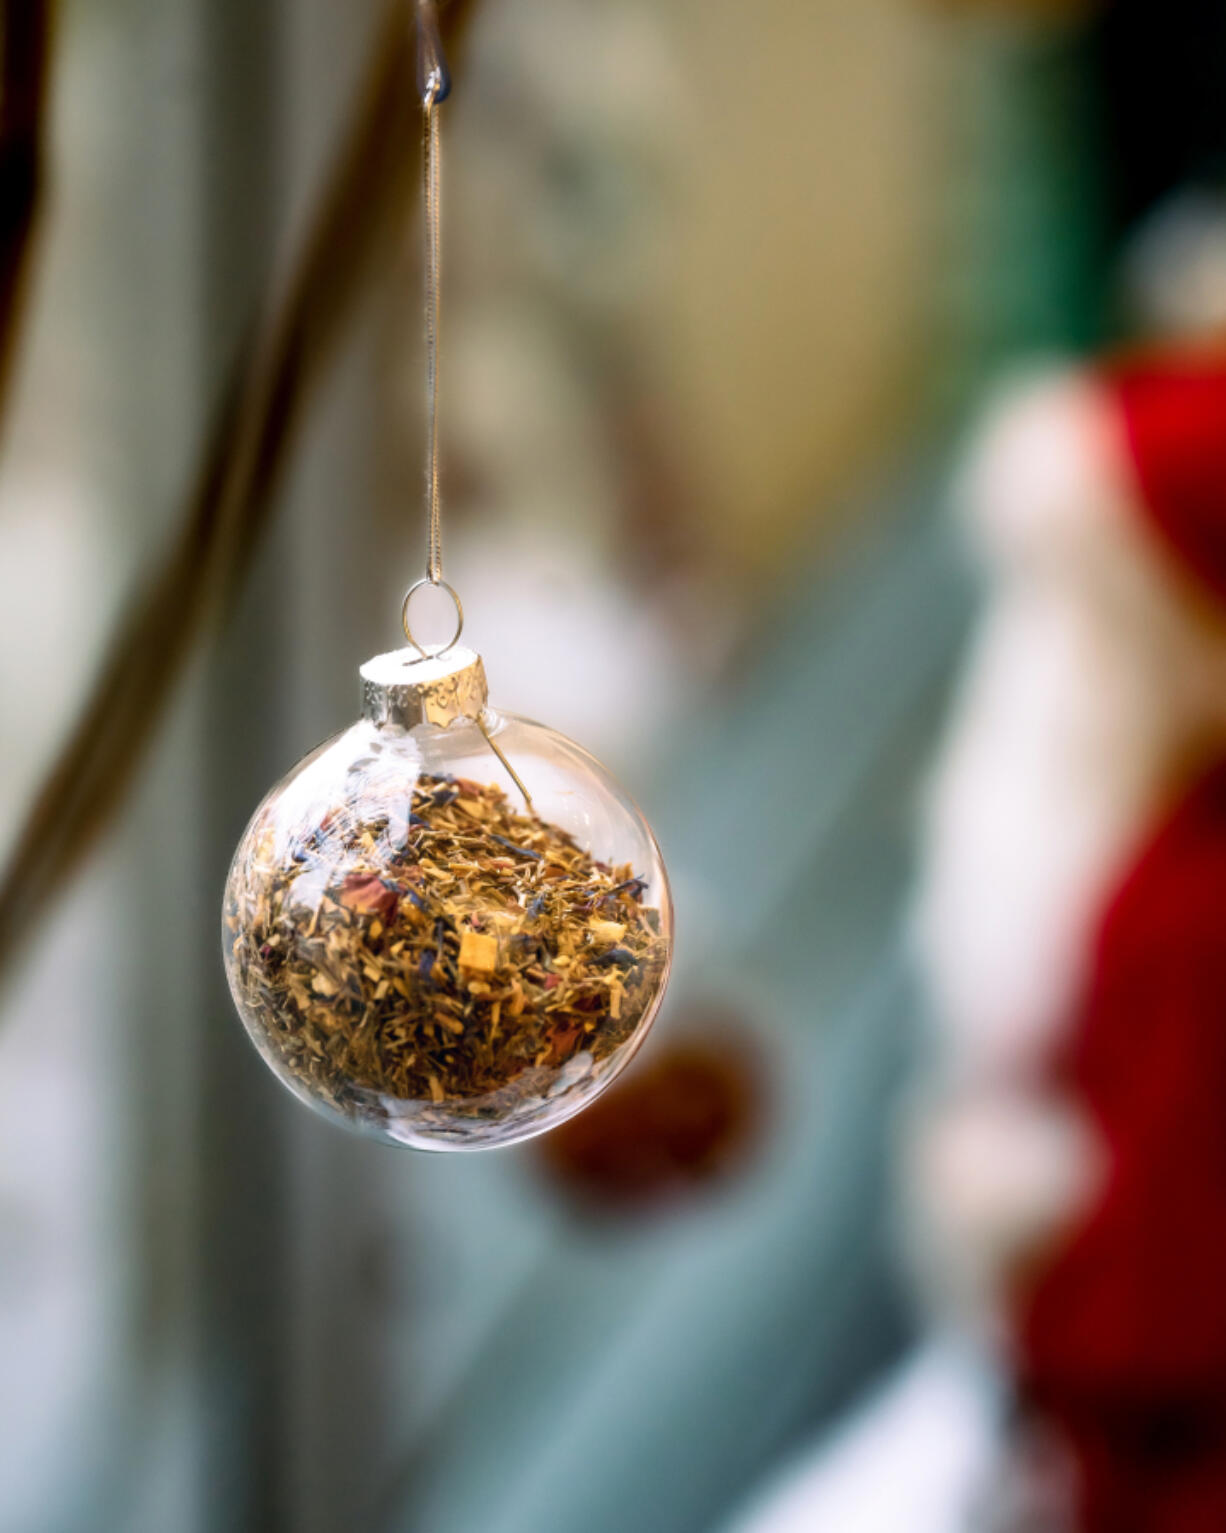 Dandelion Teahouse in Vancouver sells tea-filled holiday ornaments.